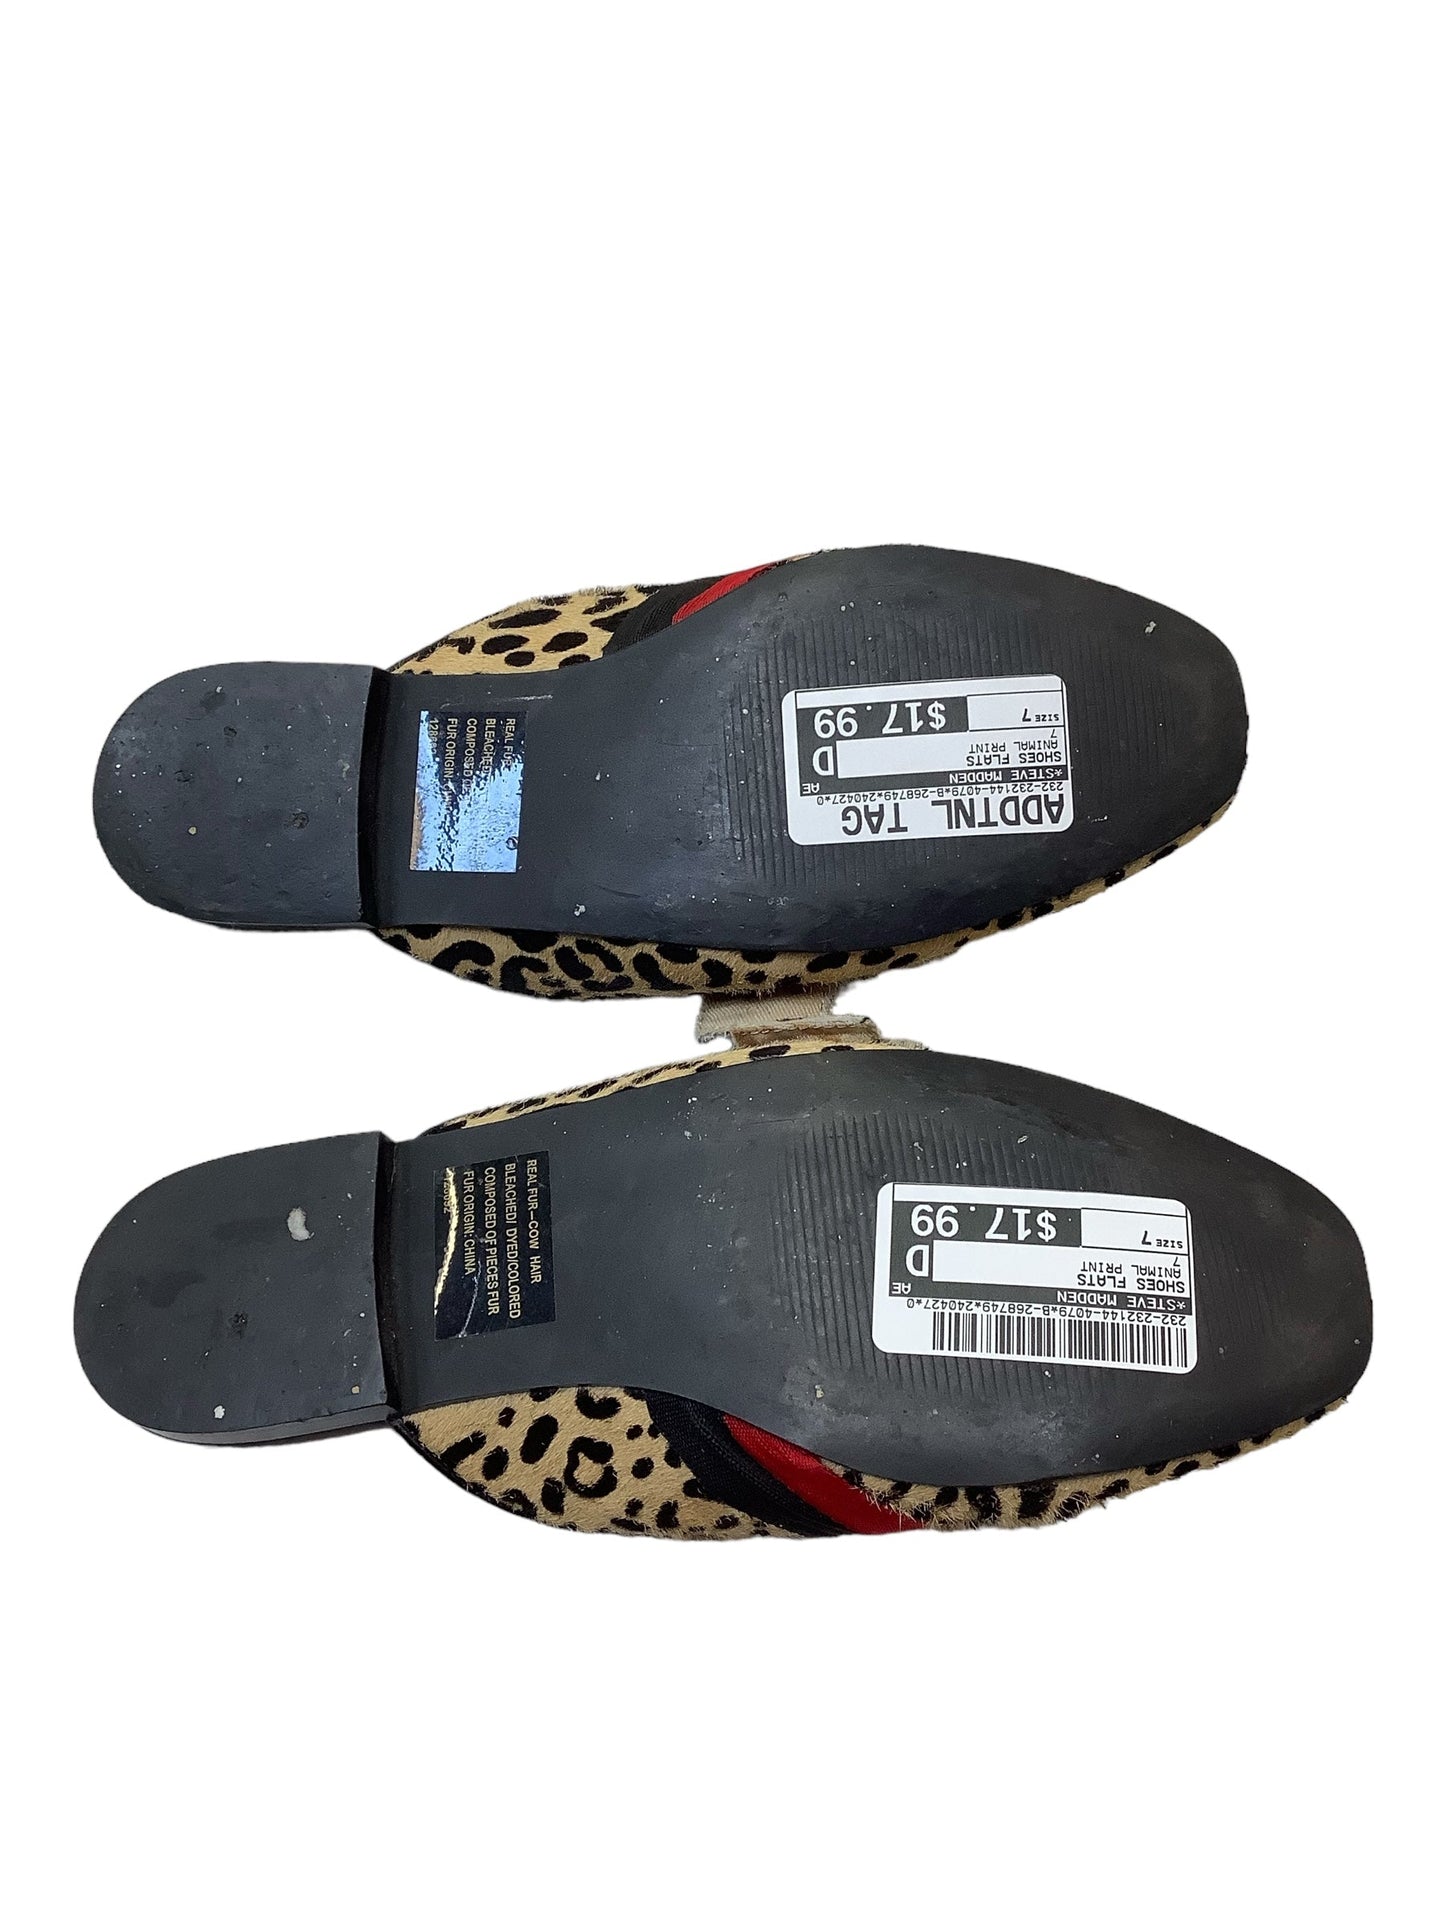 Shoes Flats By Steve Madden  Size: 7